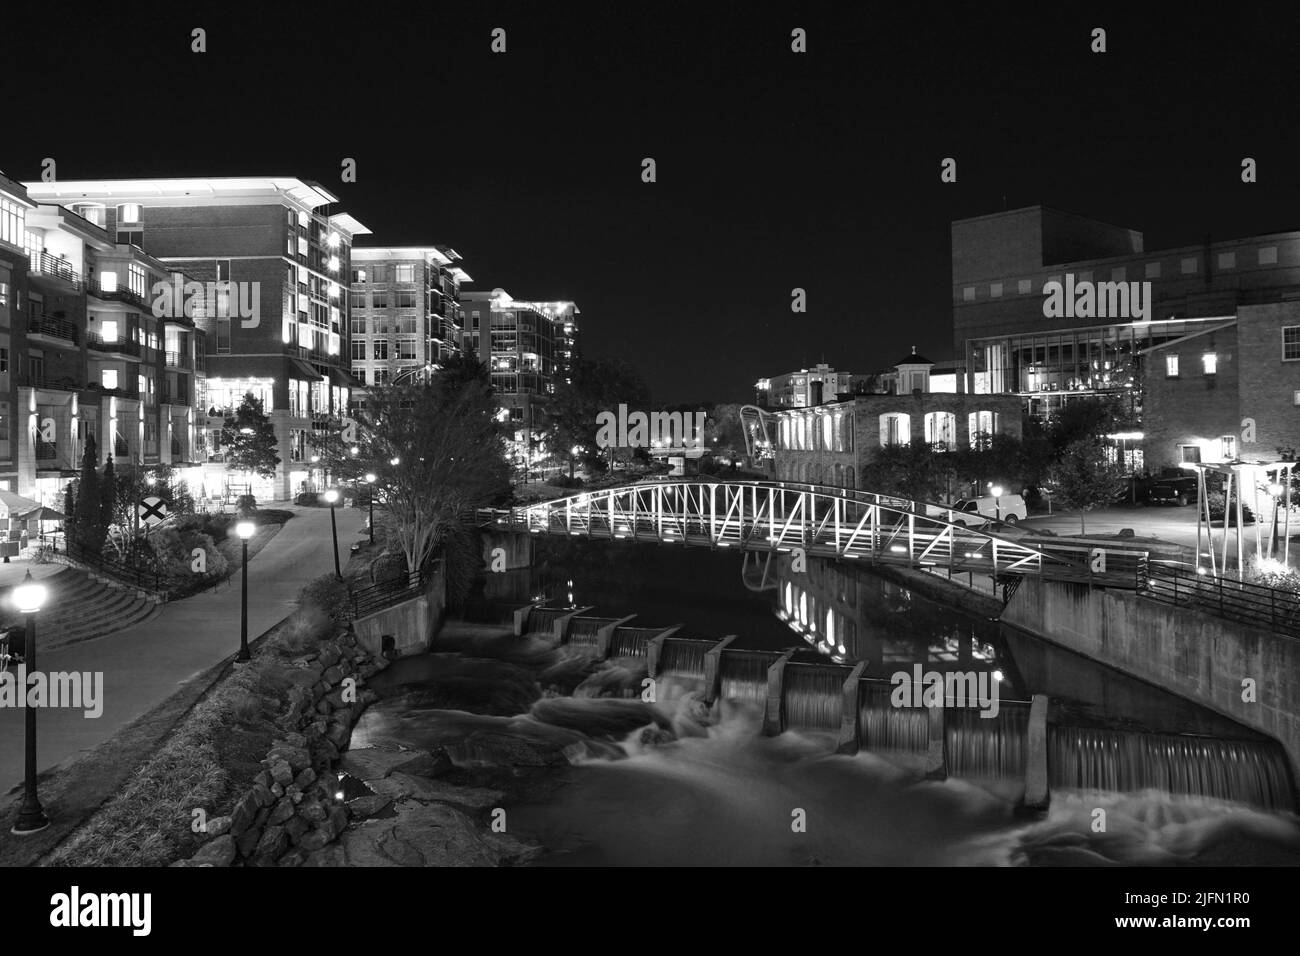 A night view of the Reedy River in downtown Greenville, SC USA. The lights of the buildings and bridge reflect in the water of the river. Shops and re Stock Photo